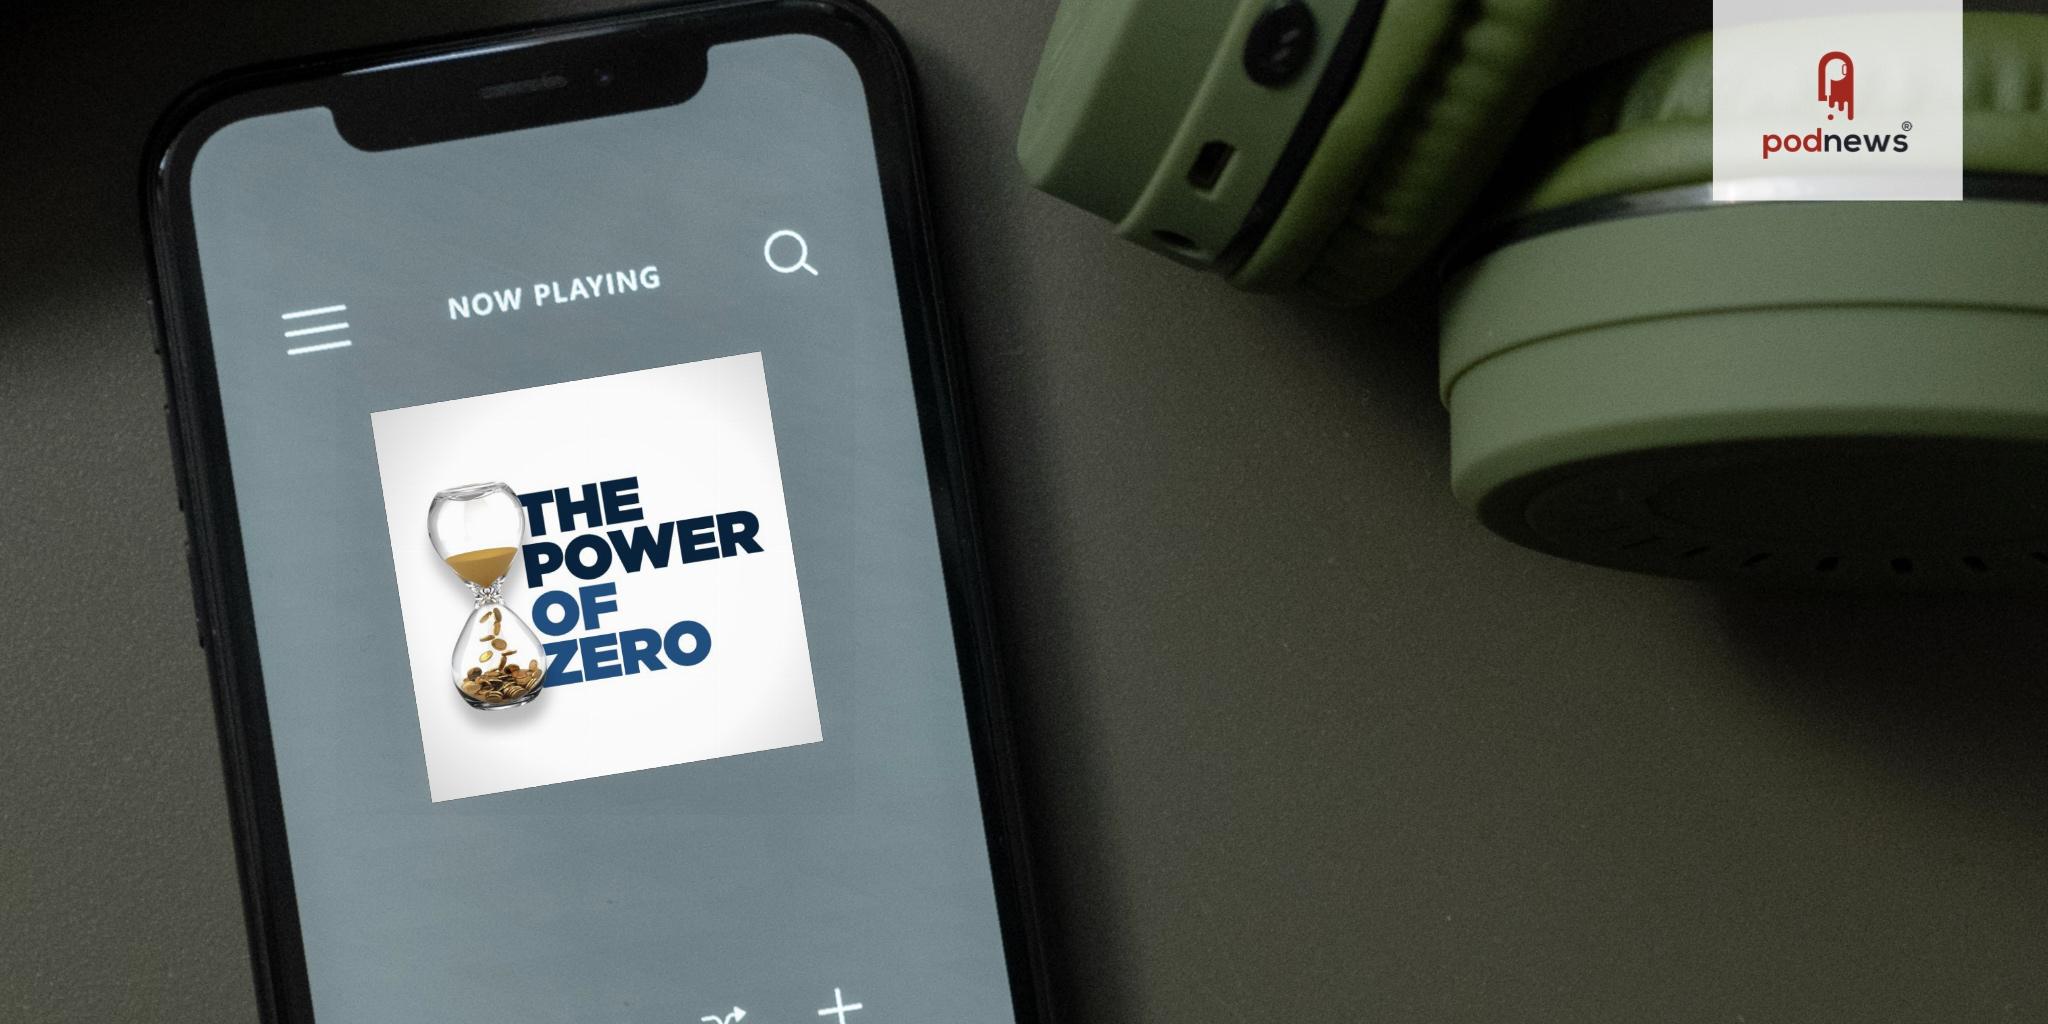 The Power of Zero Show Surpasses a Million Downloads and YouTube Views